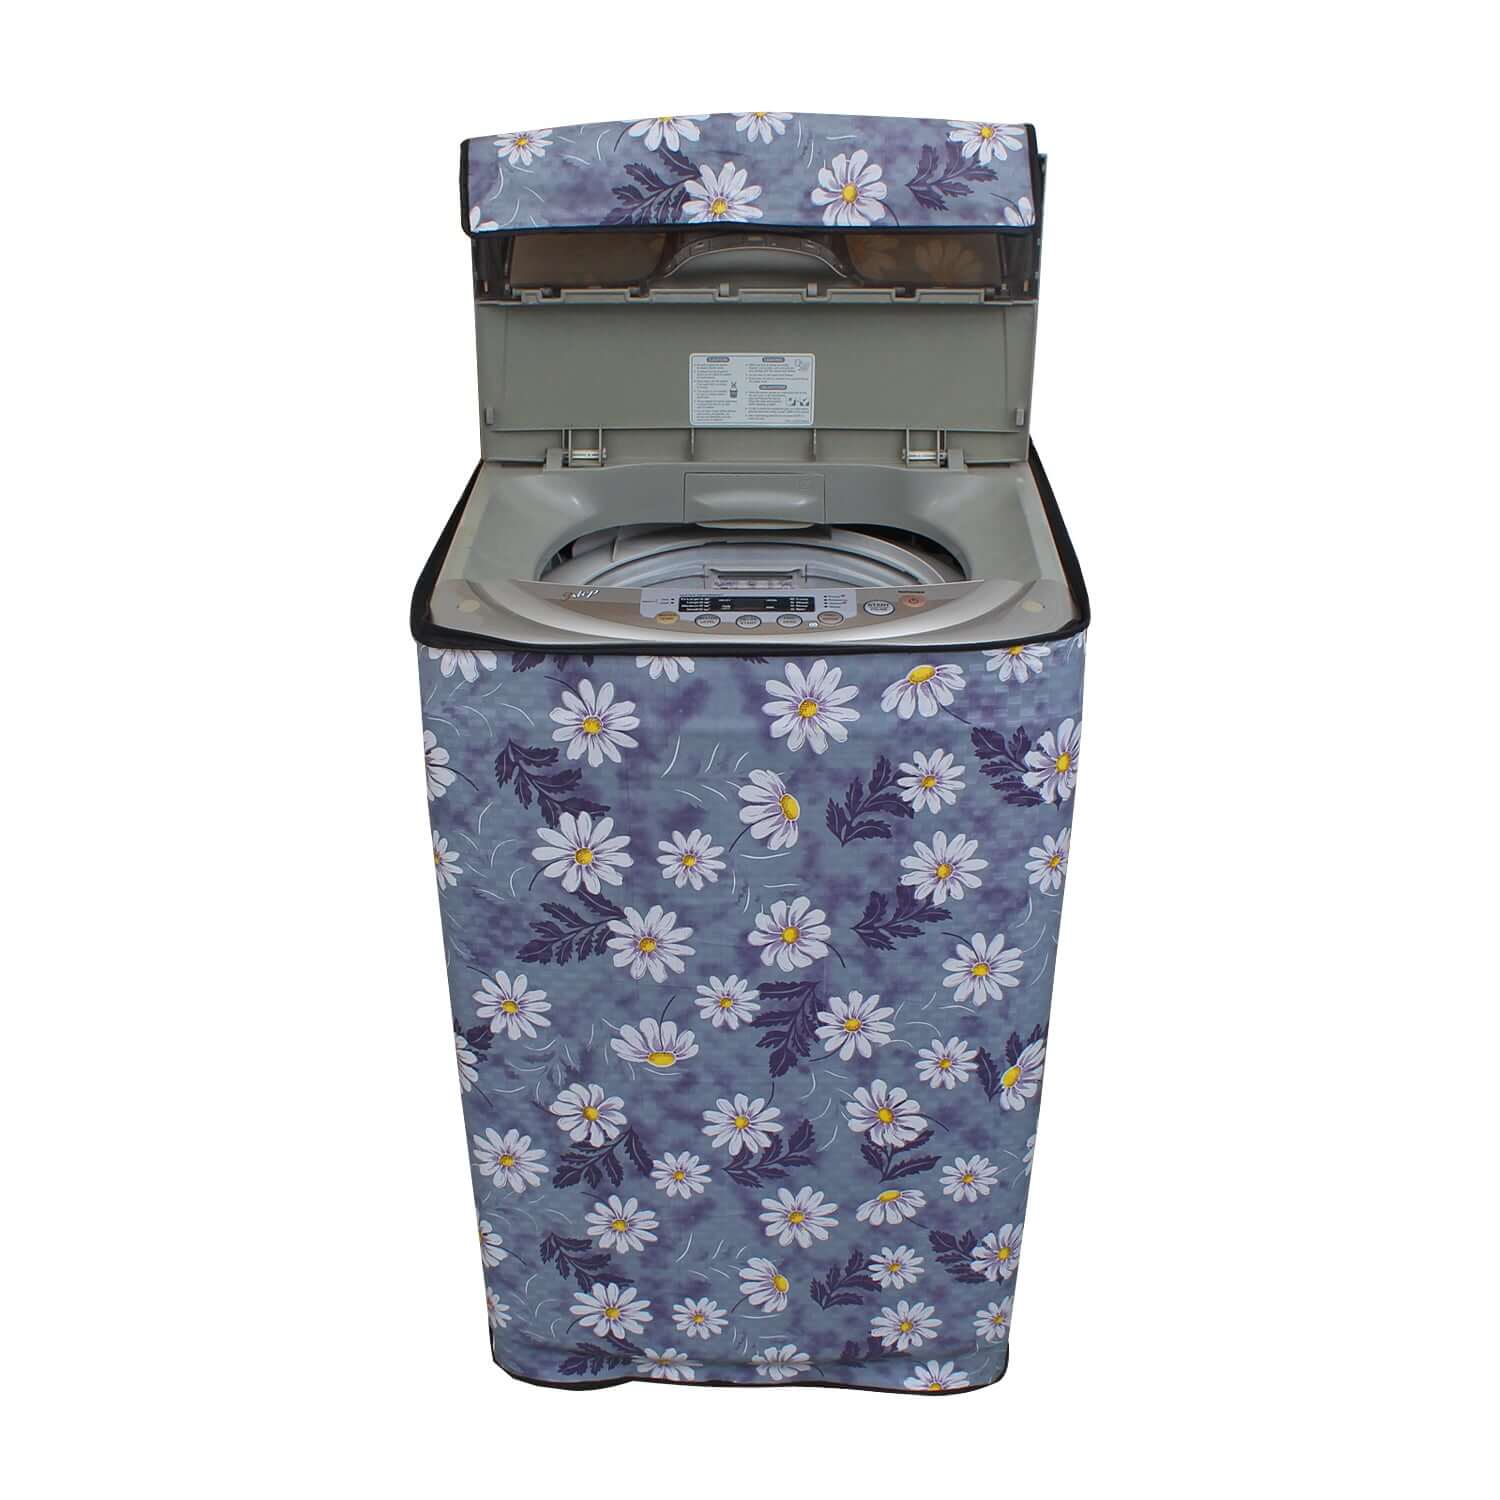 Fully Automatic Top Load Washing Machine Cover, SA10 - Dream Care Furnishings Private Limited